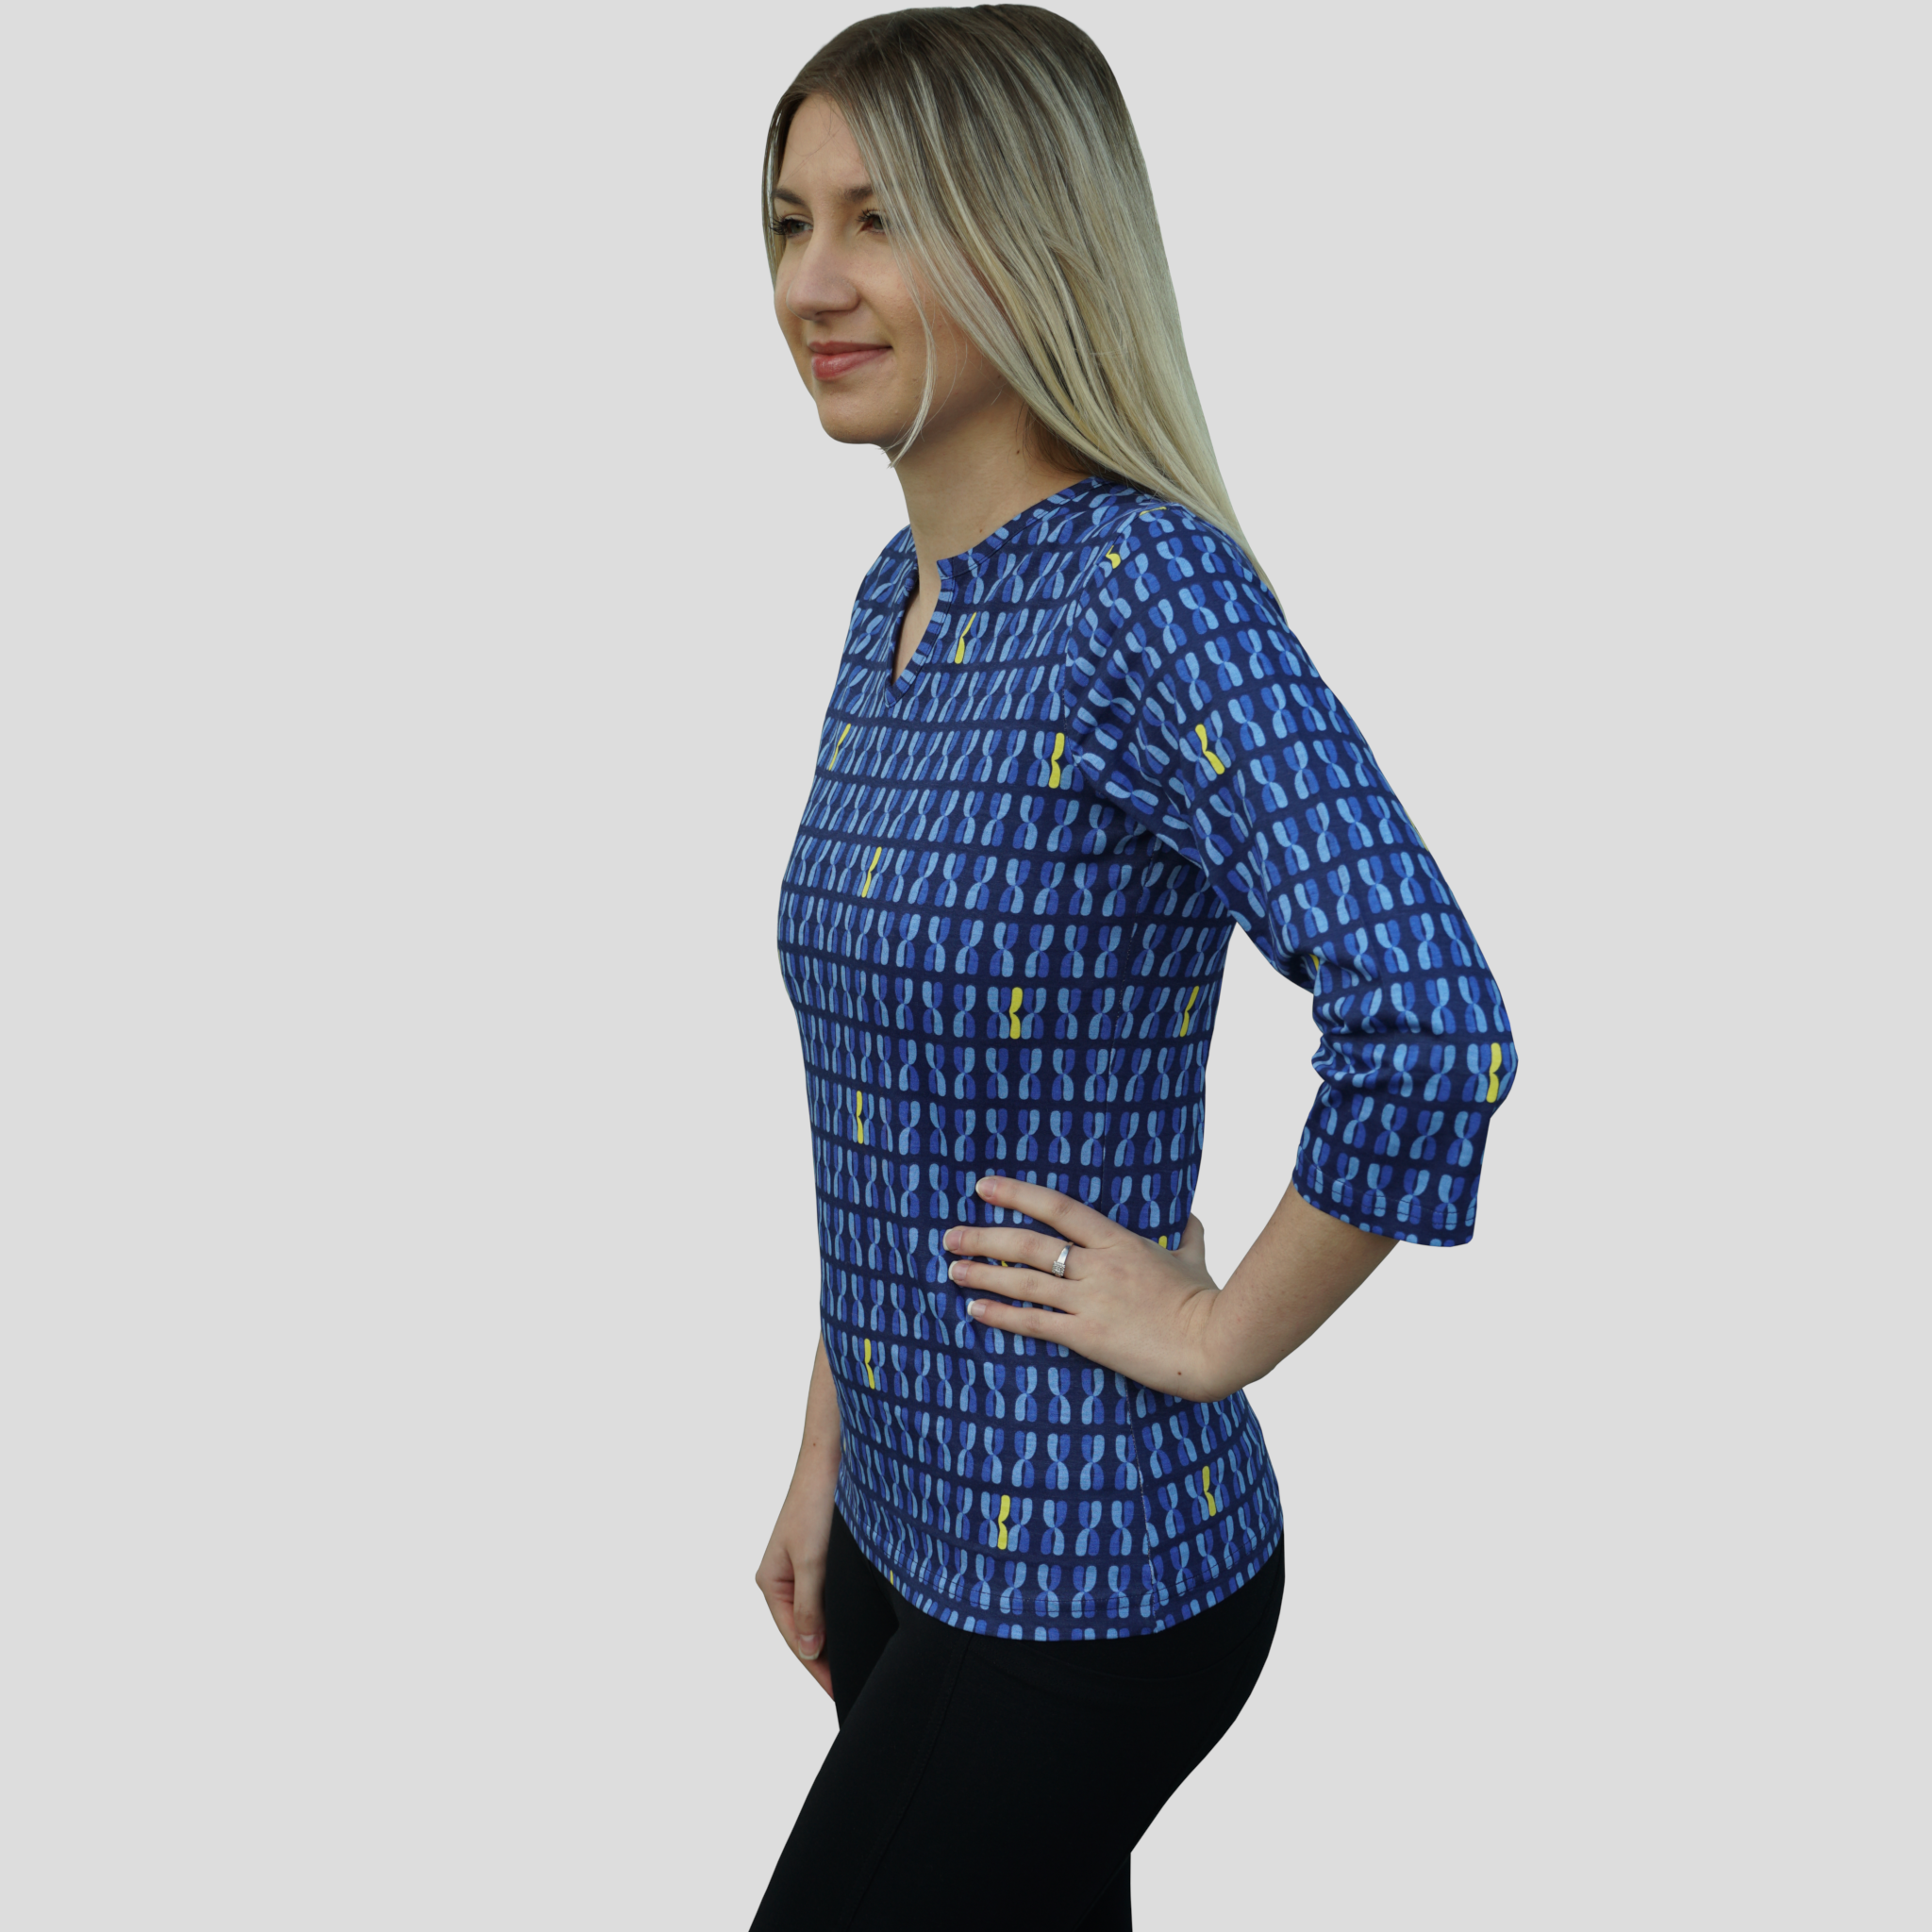 World Down Syndrome Day Maria Tunic Top [FINAL SALE]